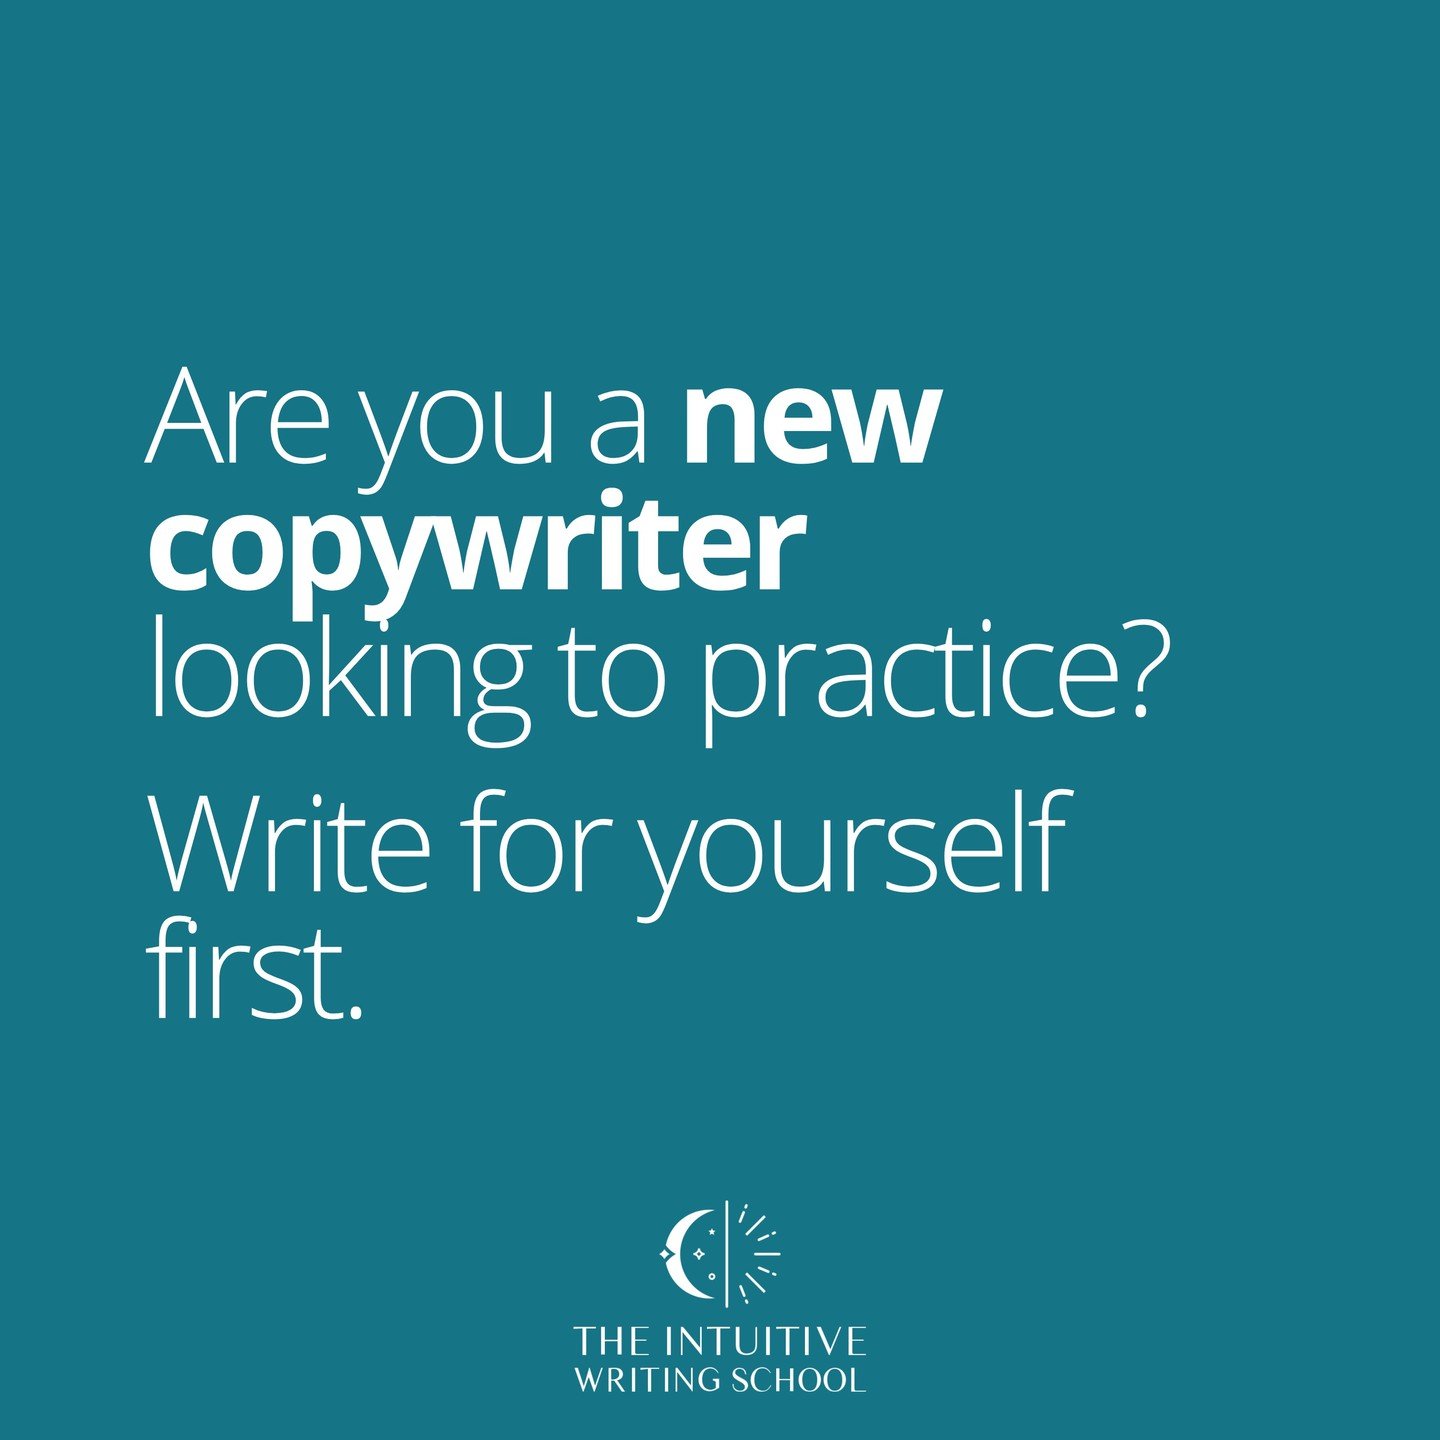 If you're a new copywriter or content writer and looking for clients... this is more important than you think

👇

WRITING

Specifically for yourself.

Especially when you're looking for clients, showing up online with your own words helps you stand 